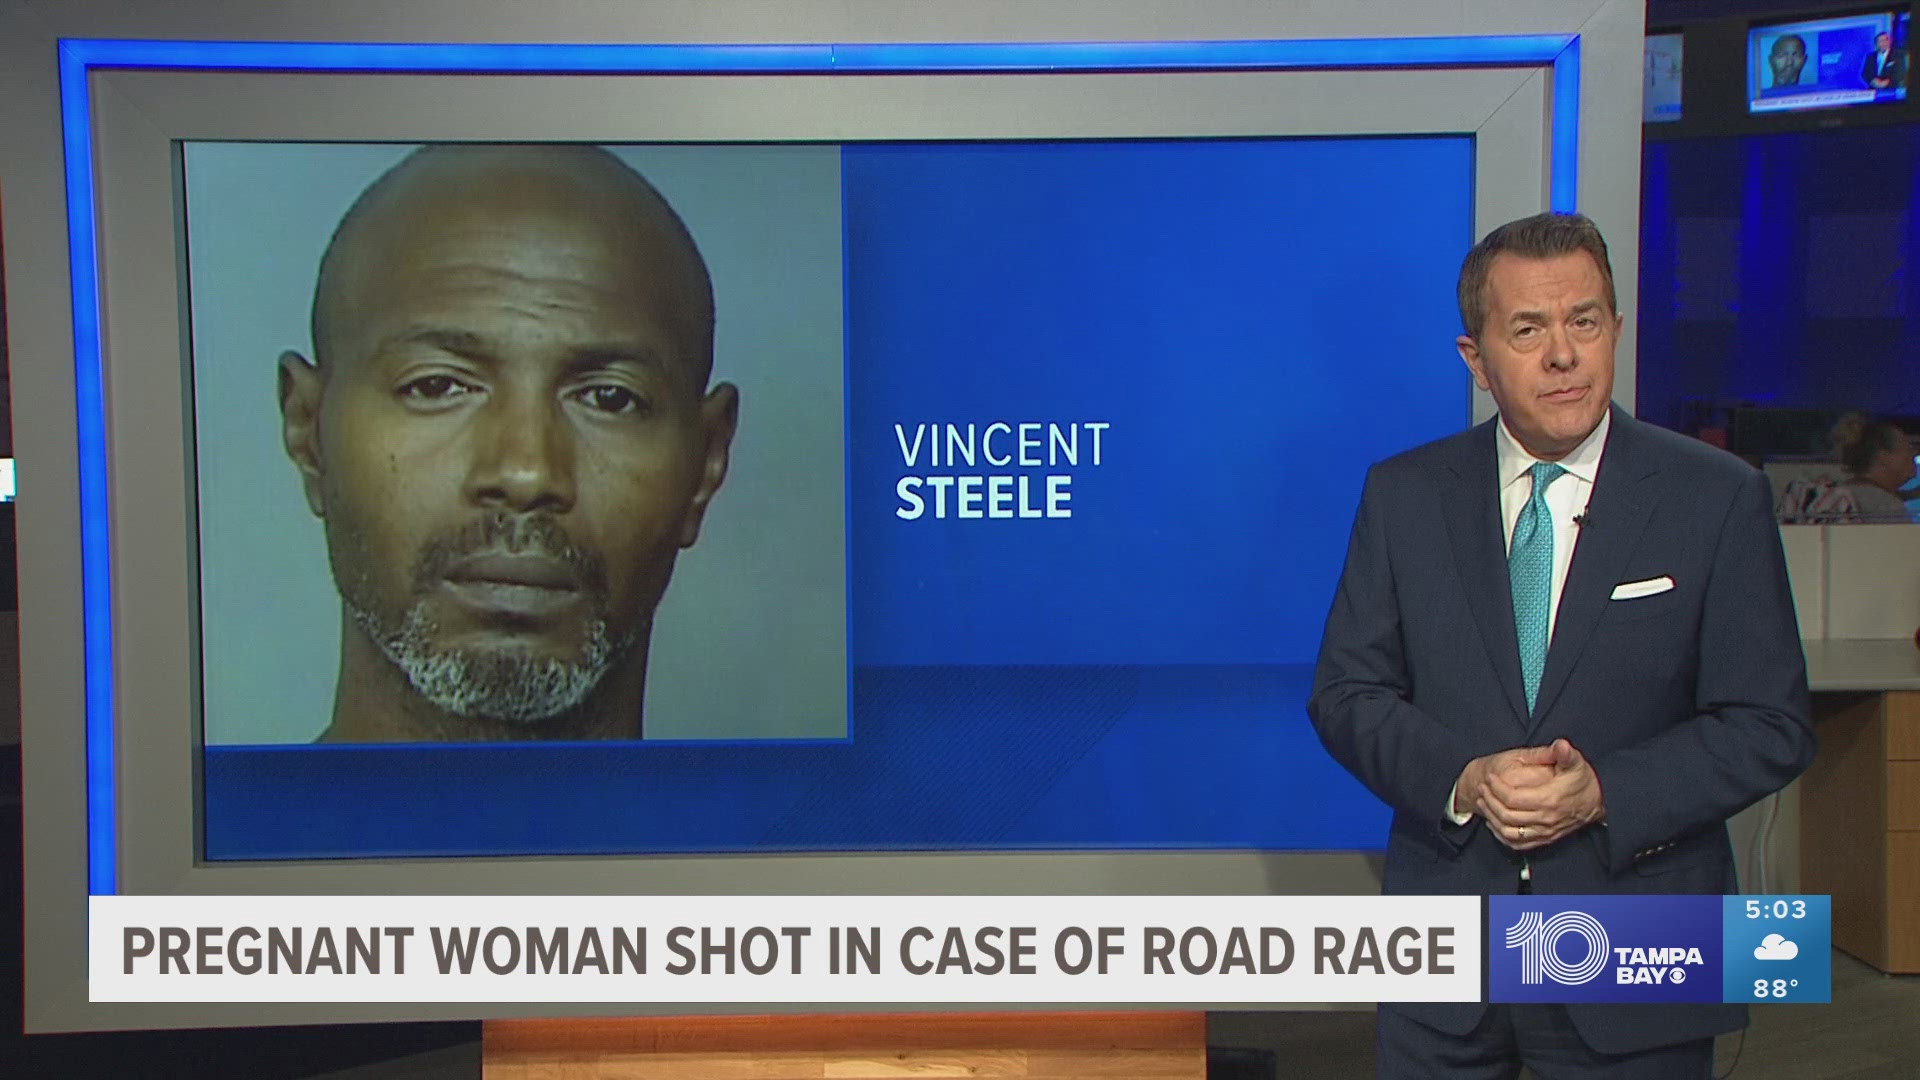 Vincent Steele is accused of shooting a pregnant woman in a case of road rage in Manatee County.